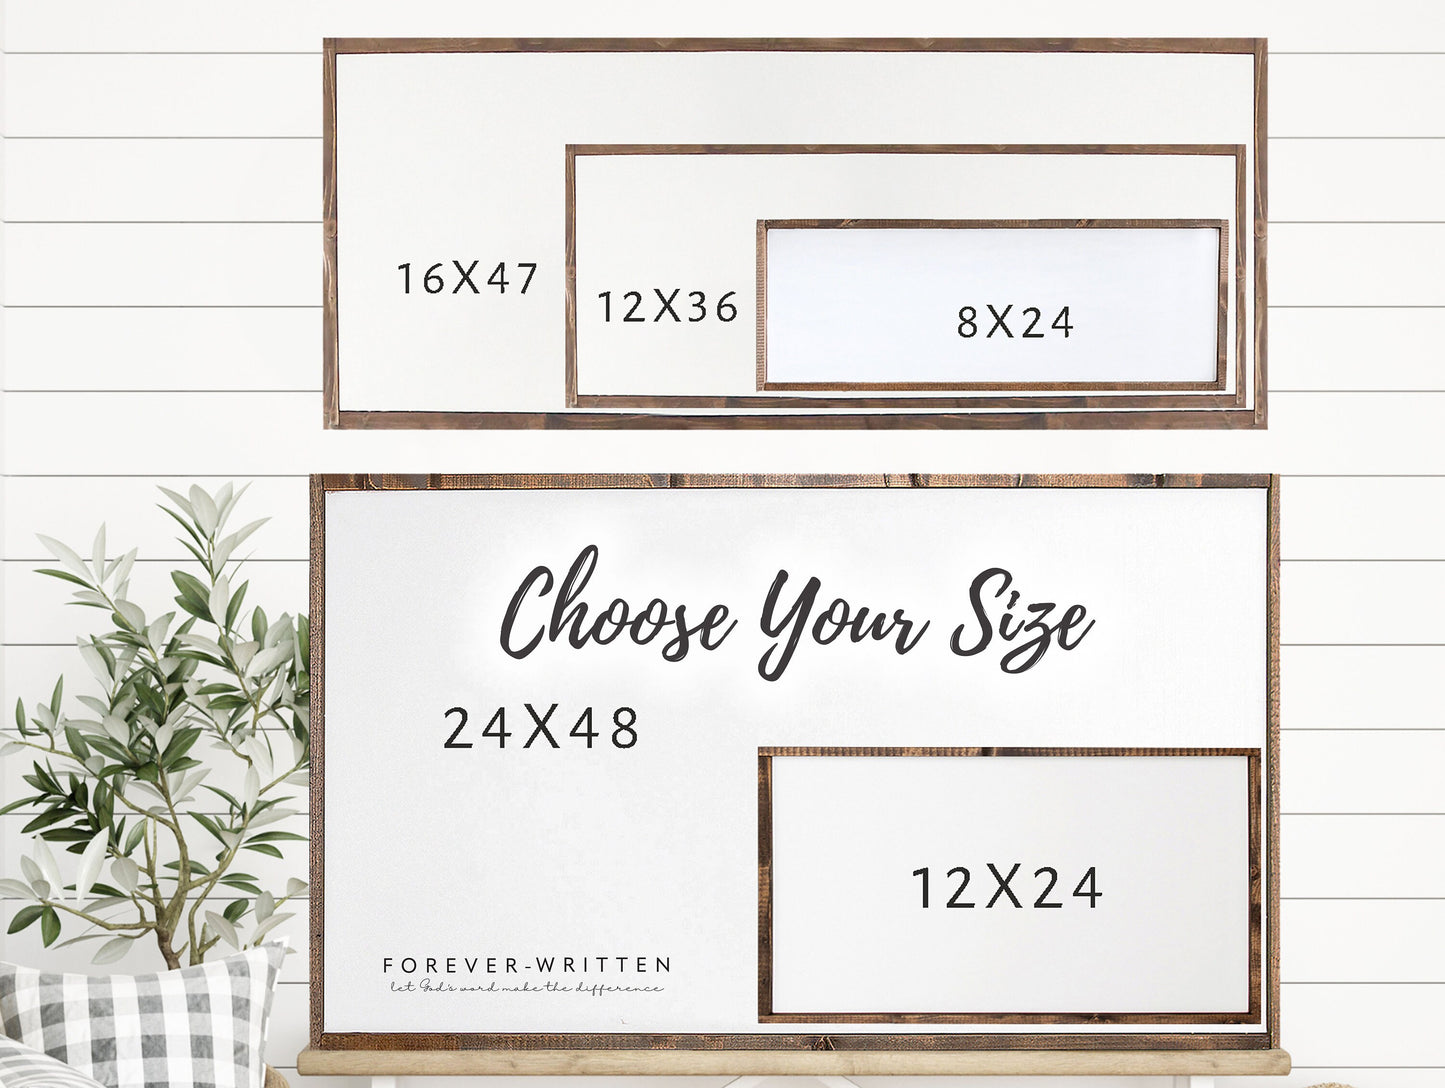 Christian Wall Art | For Where Two or Three Are Gathered Together In My Name, There am I | Dining Room Wood Sign Farmhouse | Matthew 18:20